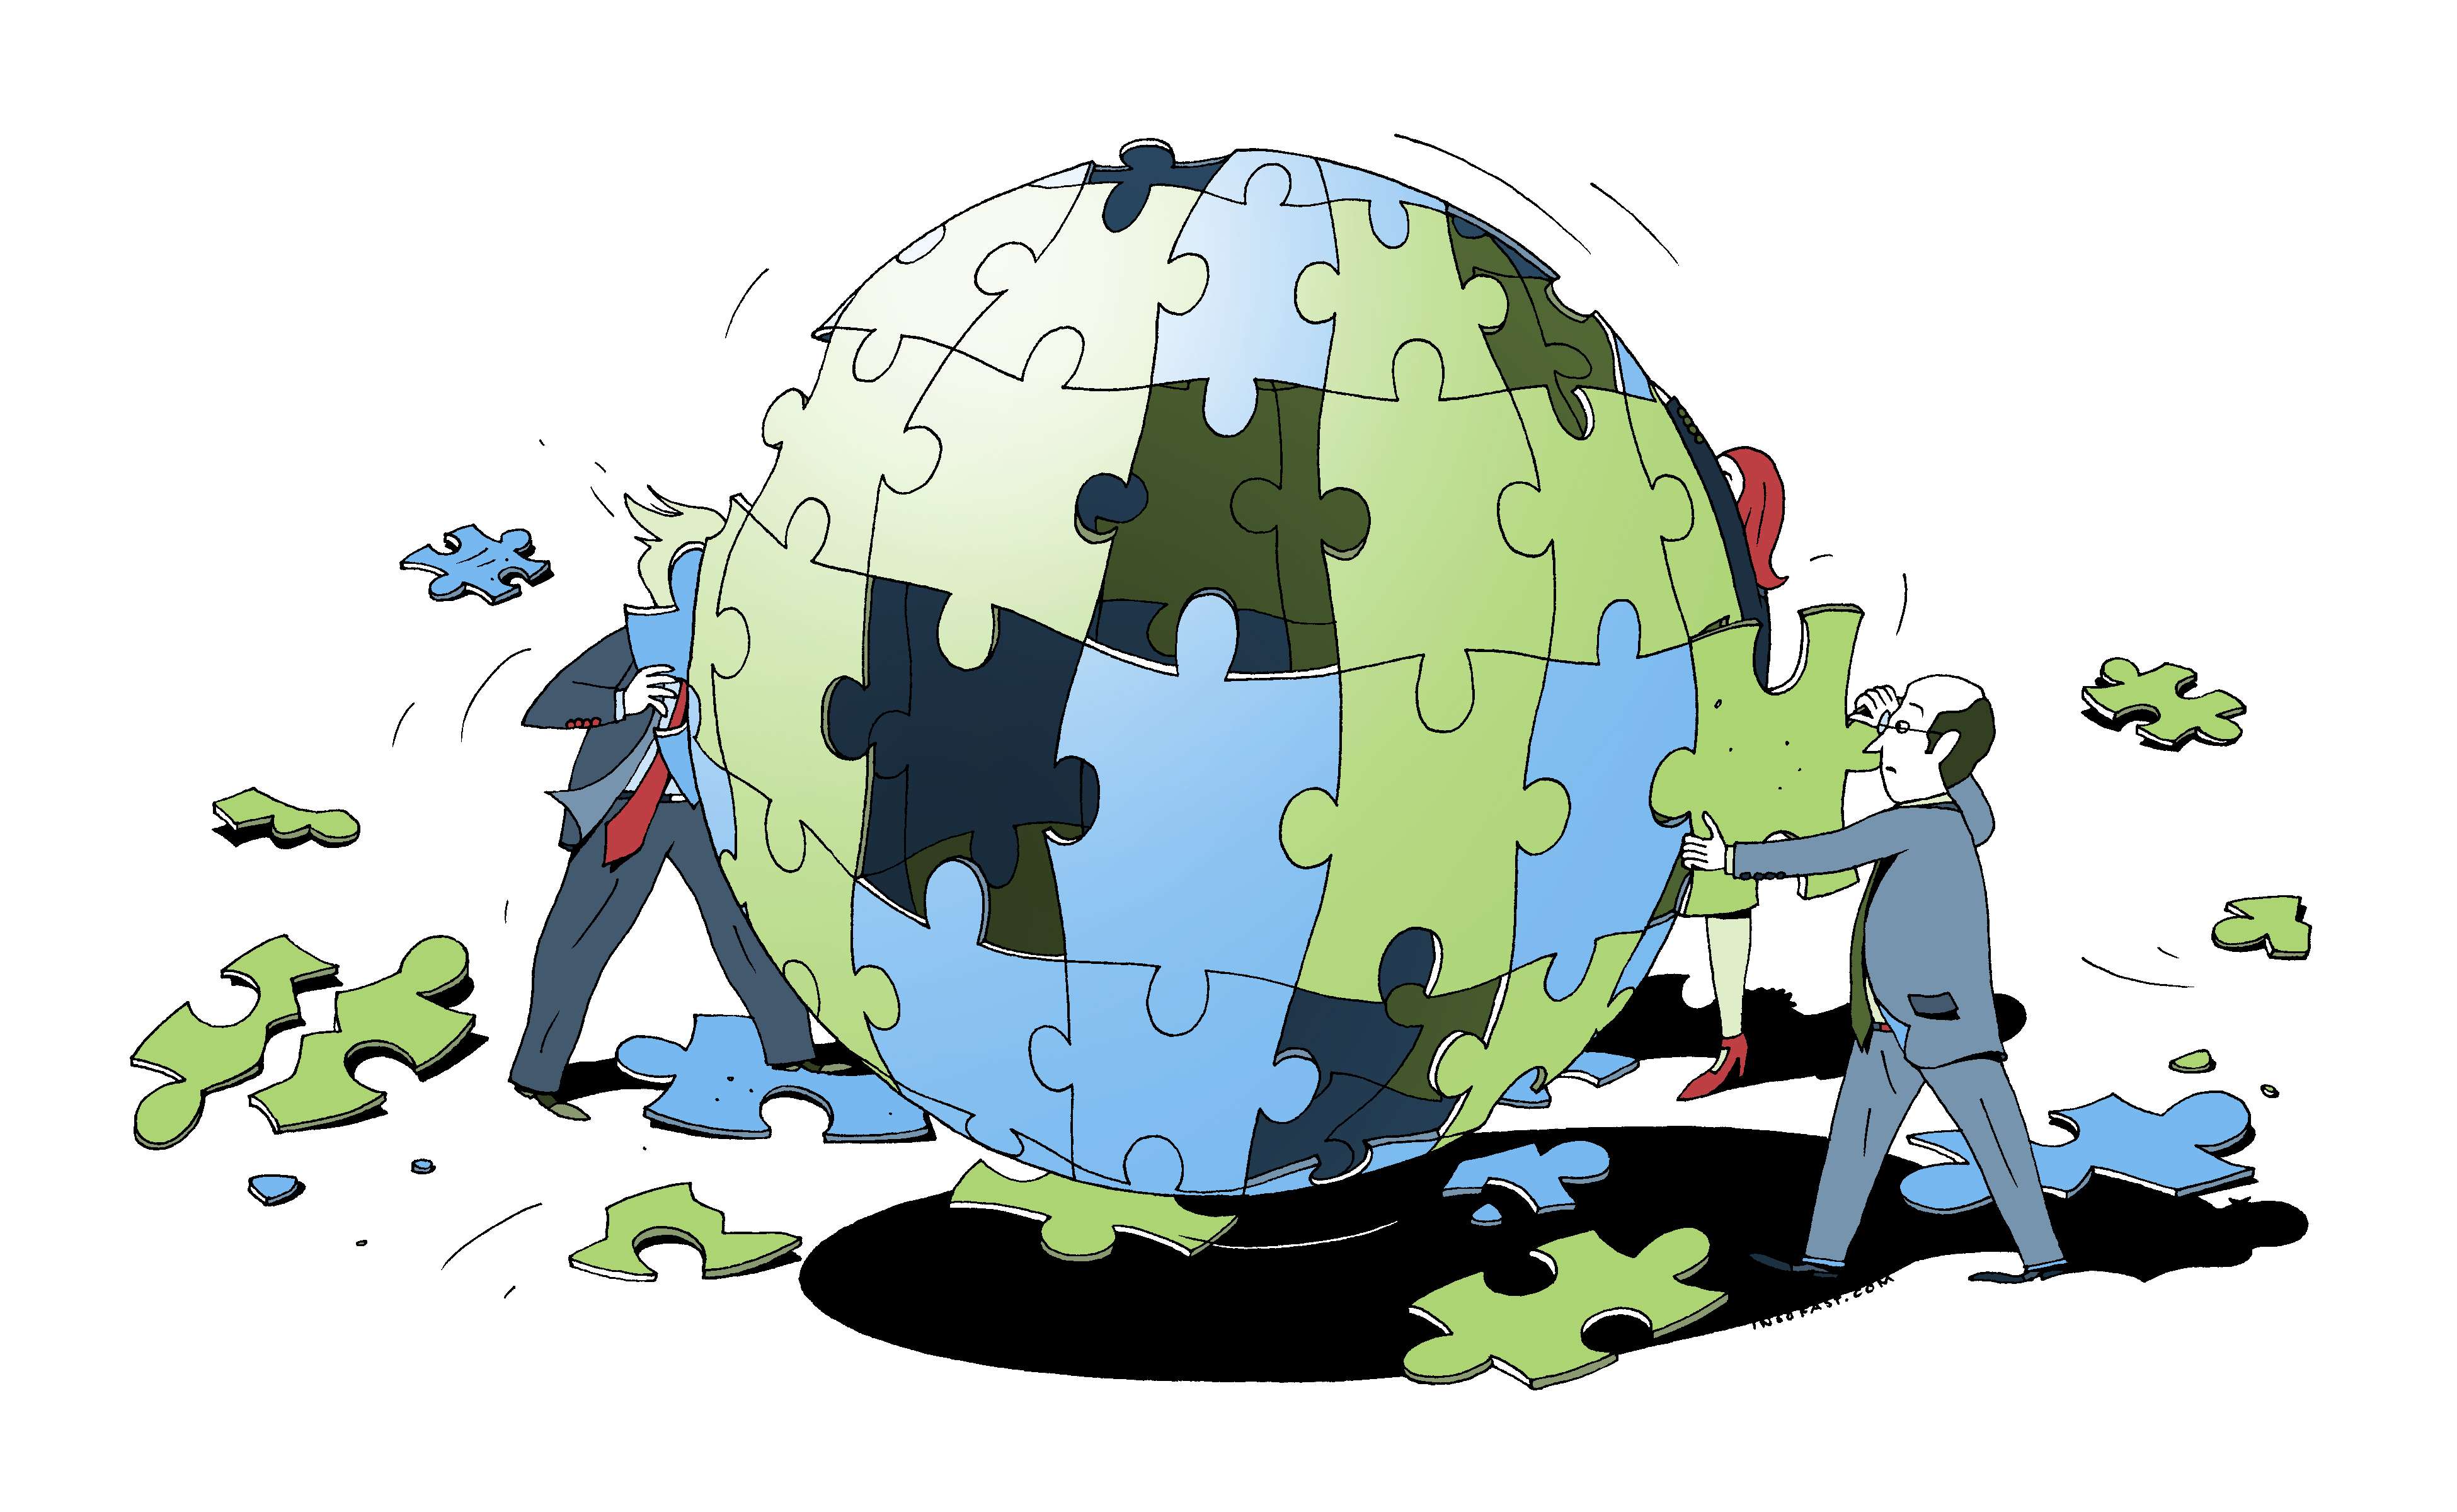 The policies we have used to manage globalisation have sown the seeds of disaffection. Illustration: Ingo Fast